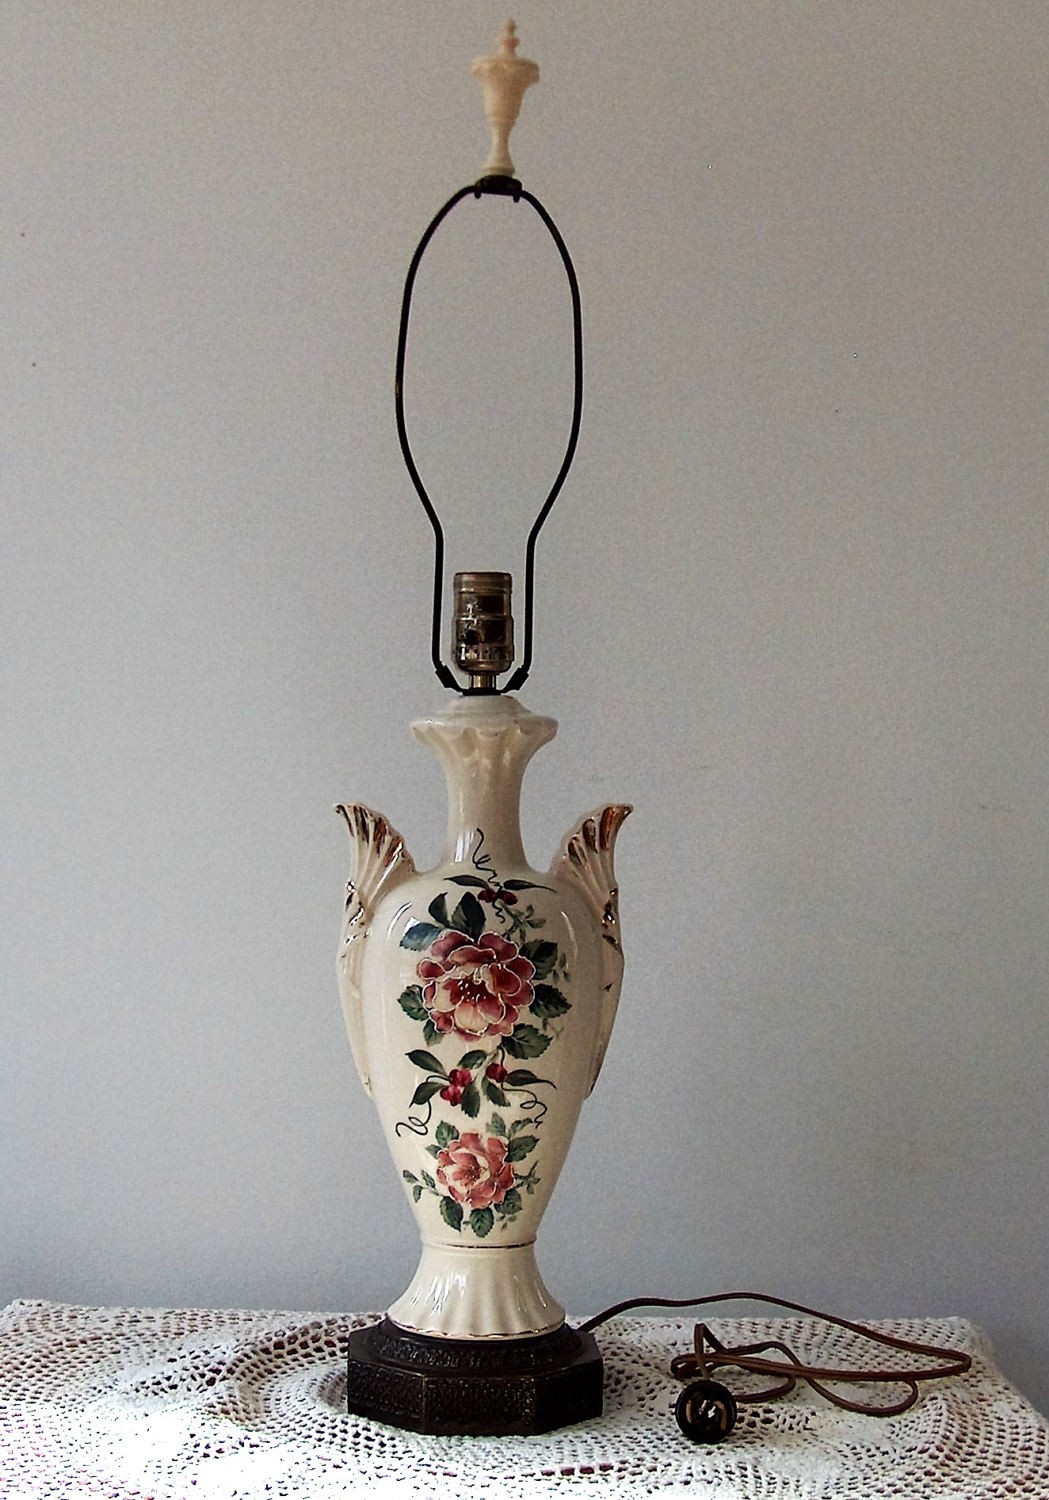 Antique hand rose painted porcelain table lamp